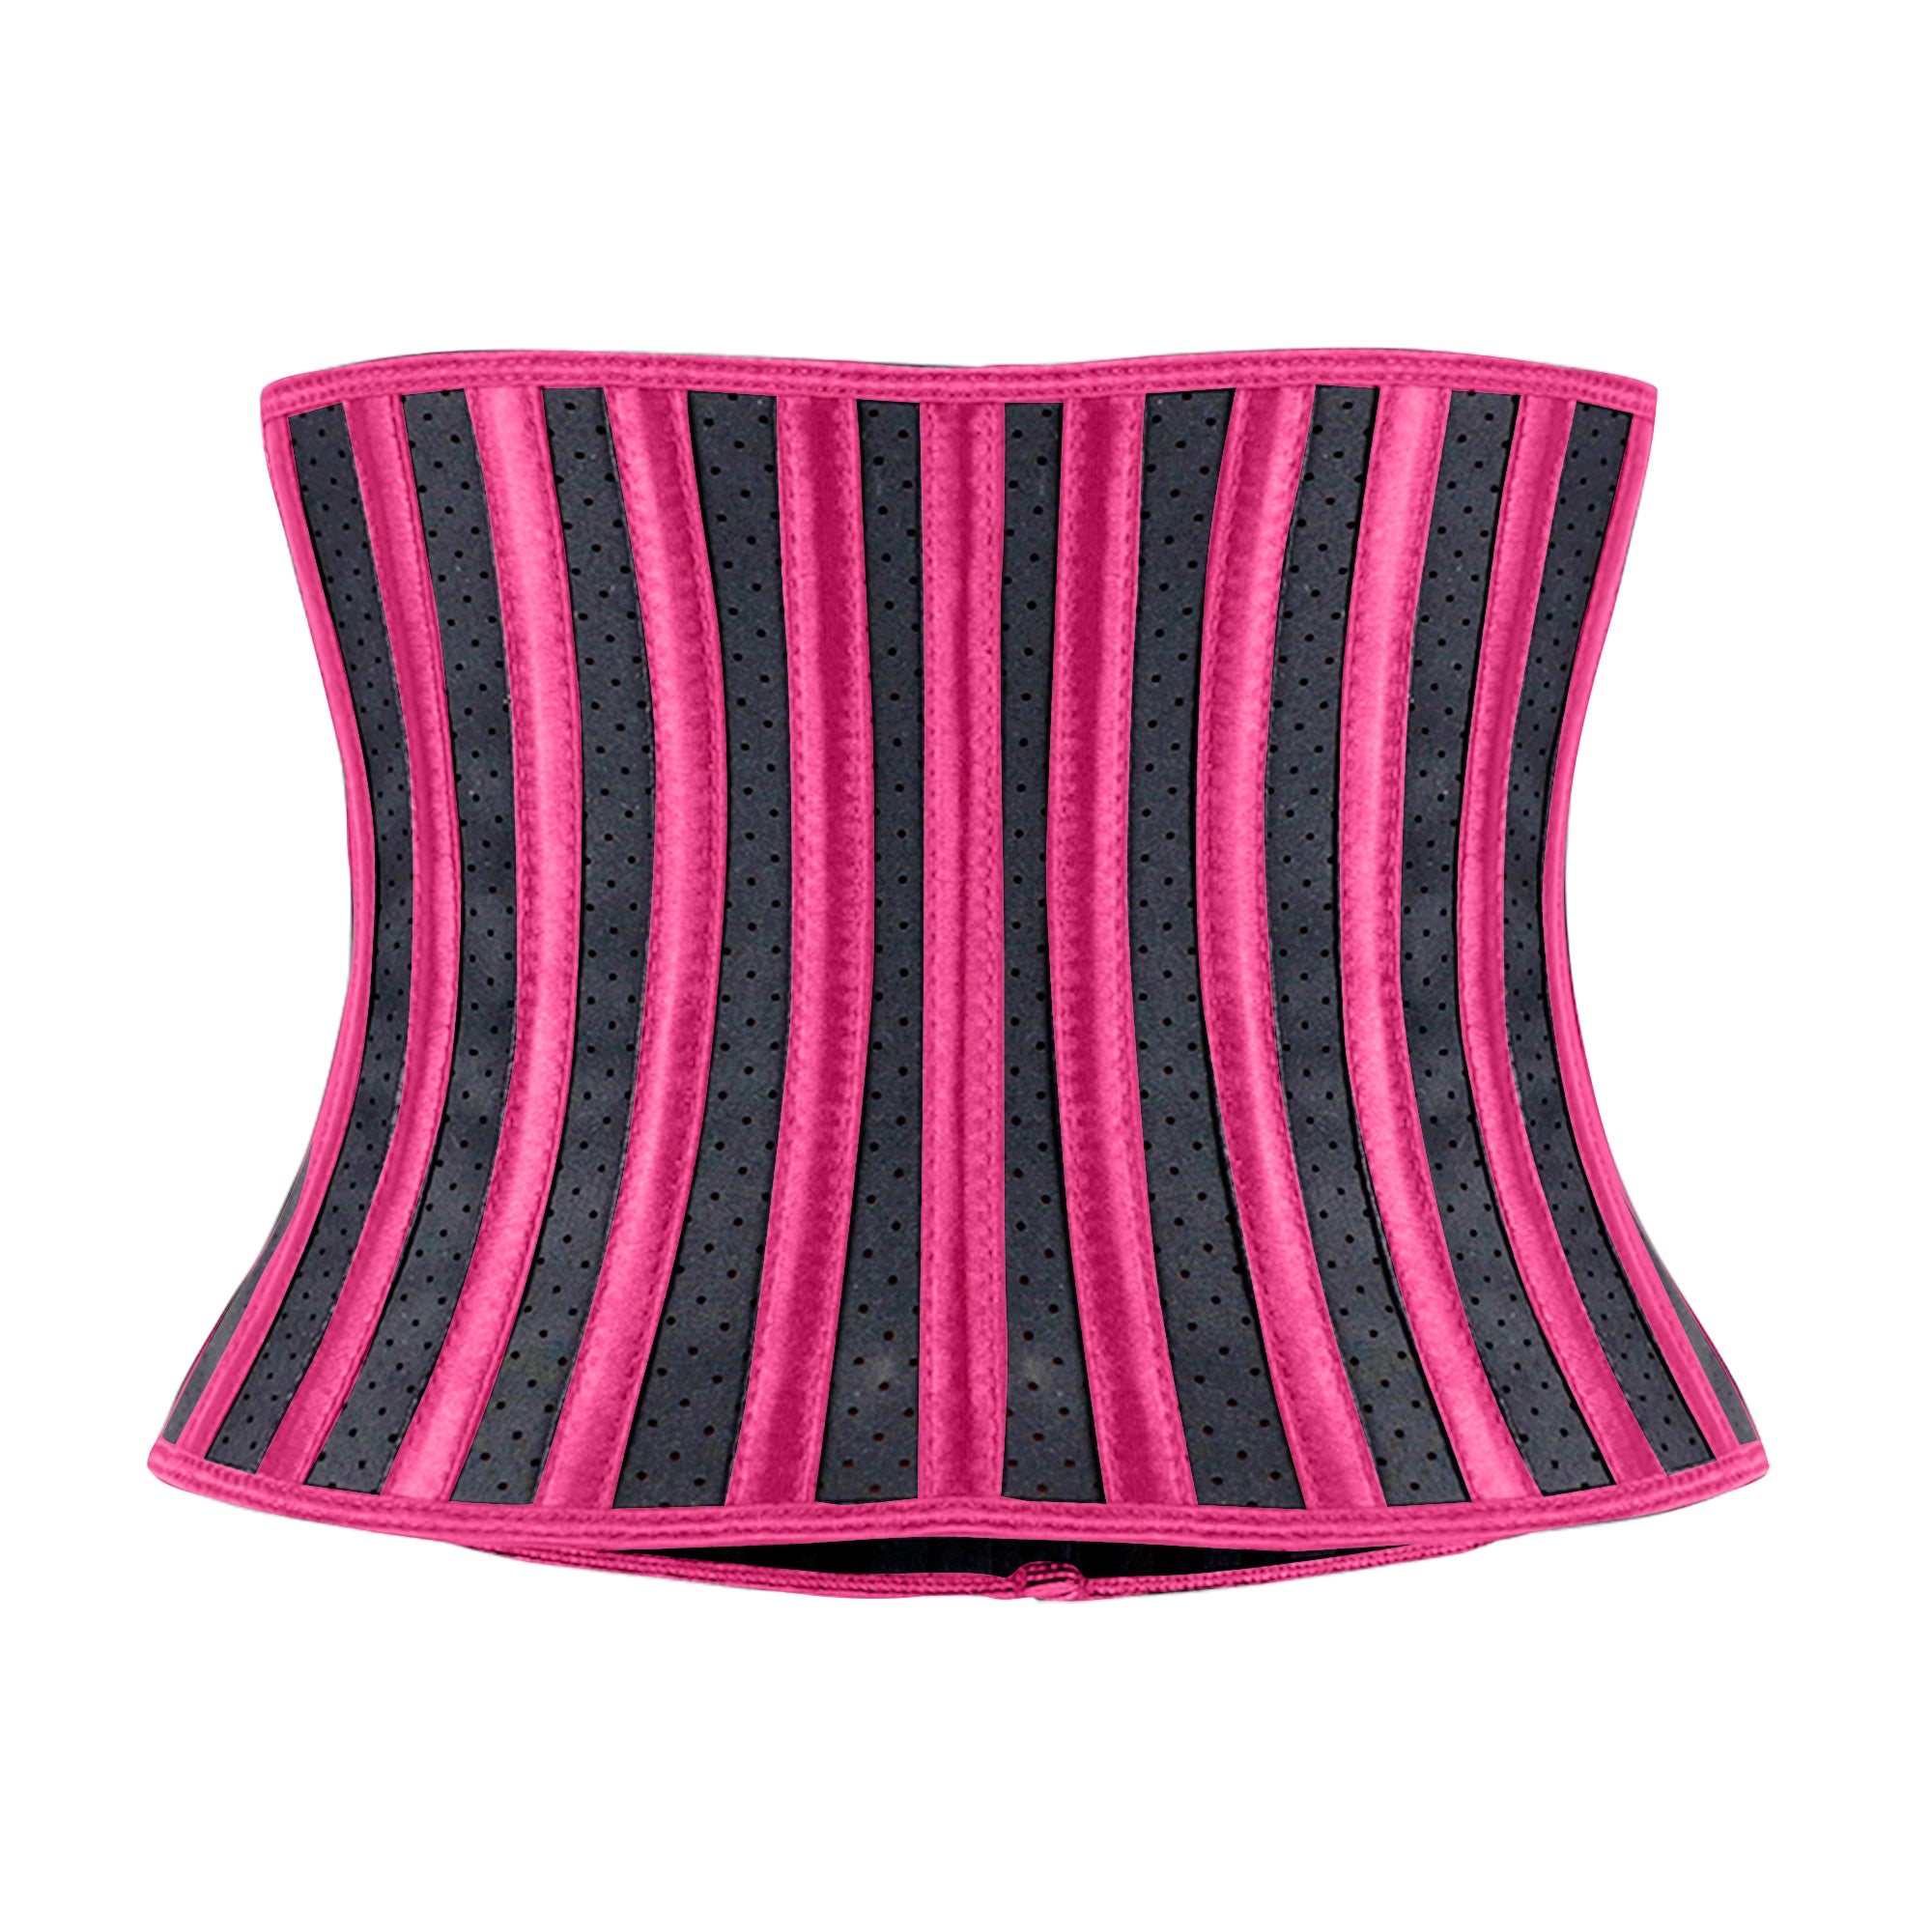 Maskateer - Breathable Waist Trainer Collection Air – BFF